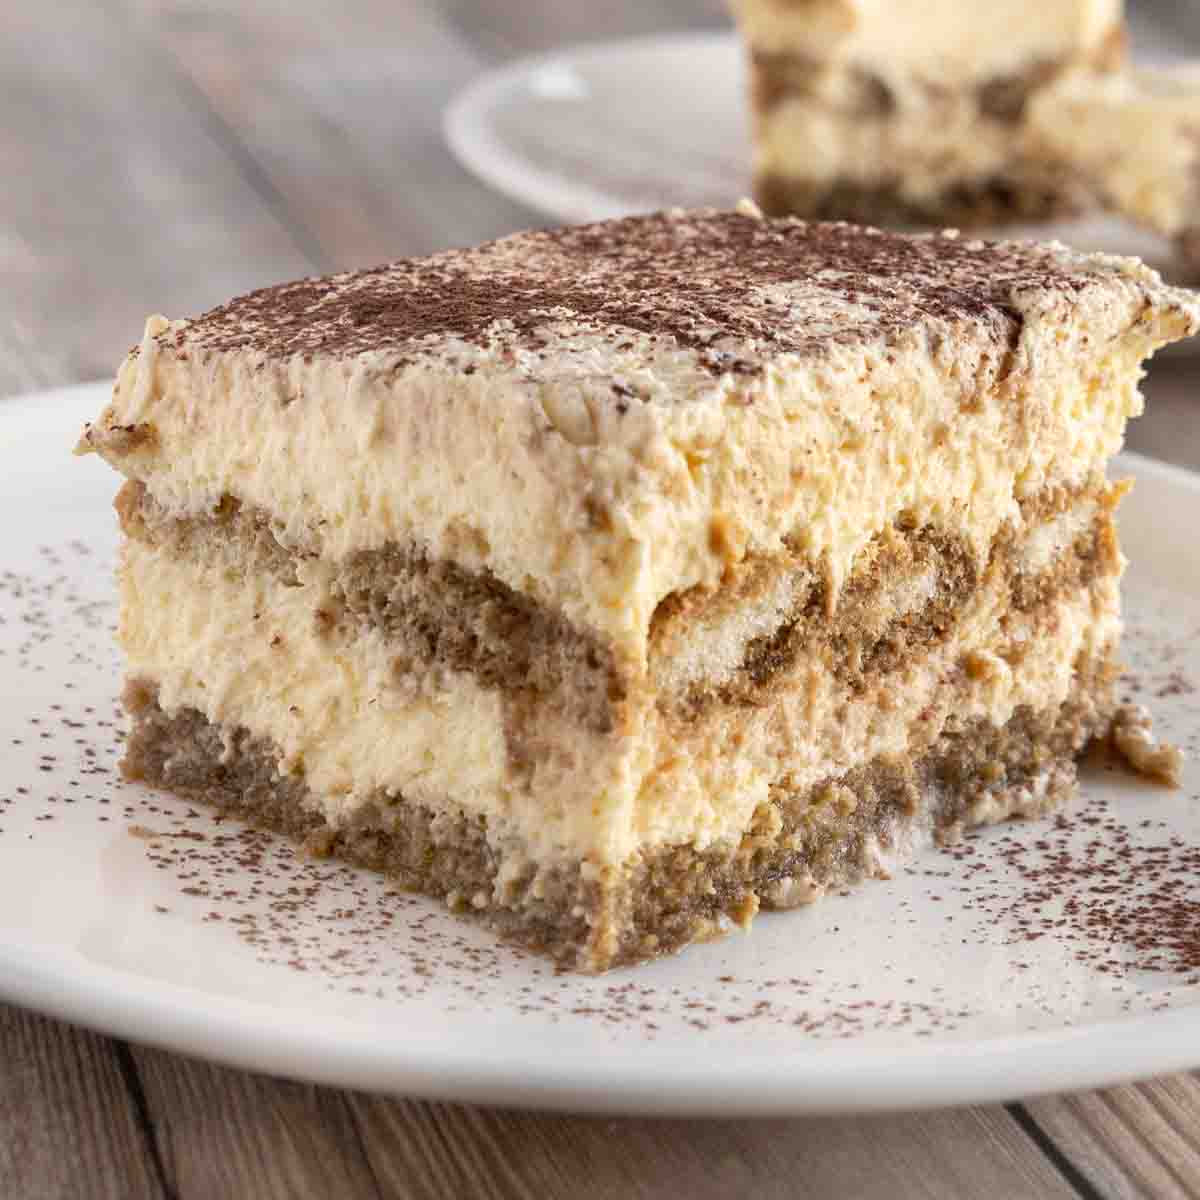 Slice of tiramisu on a white plate, dusted with cocoa powder.